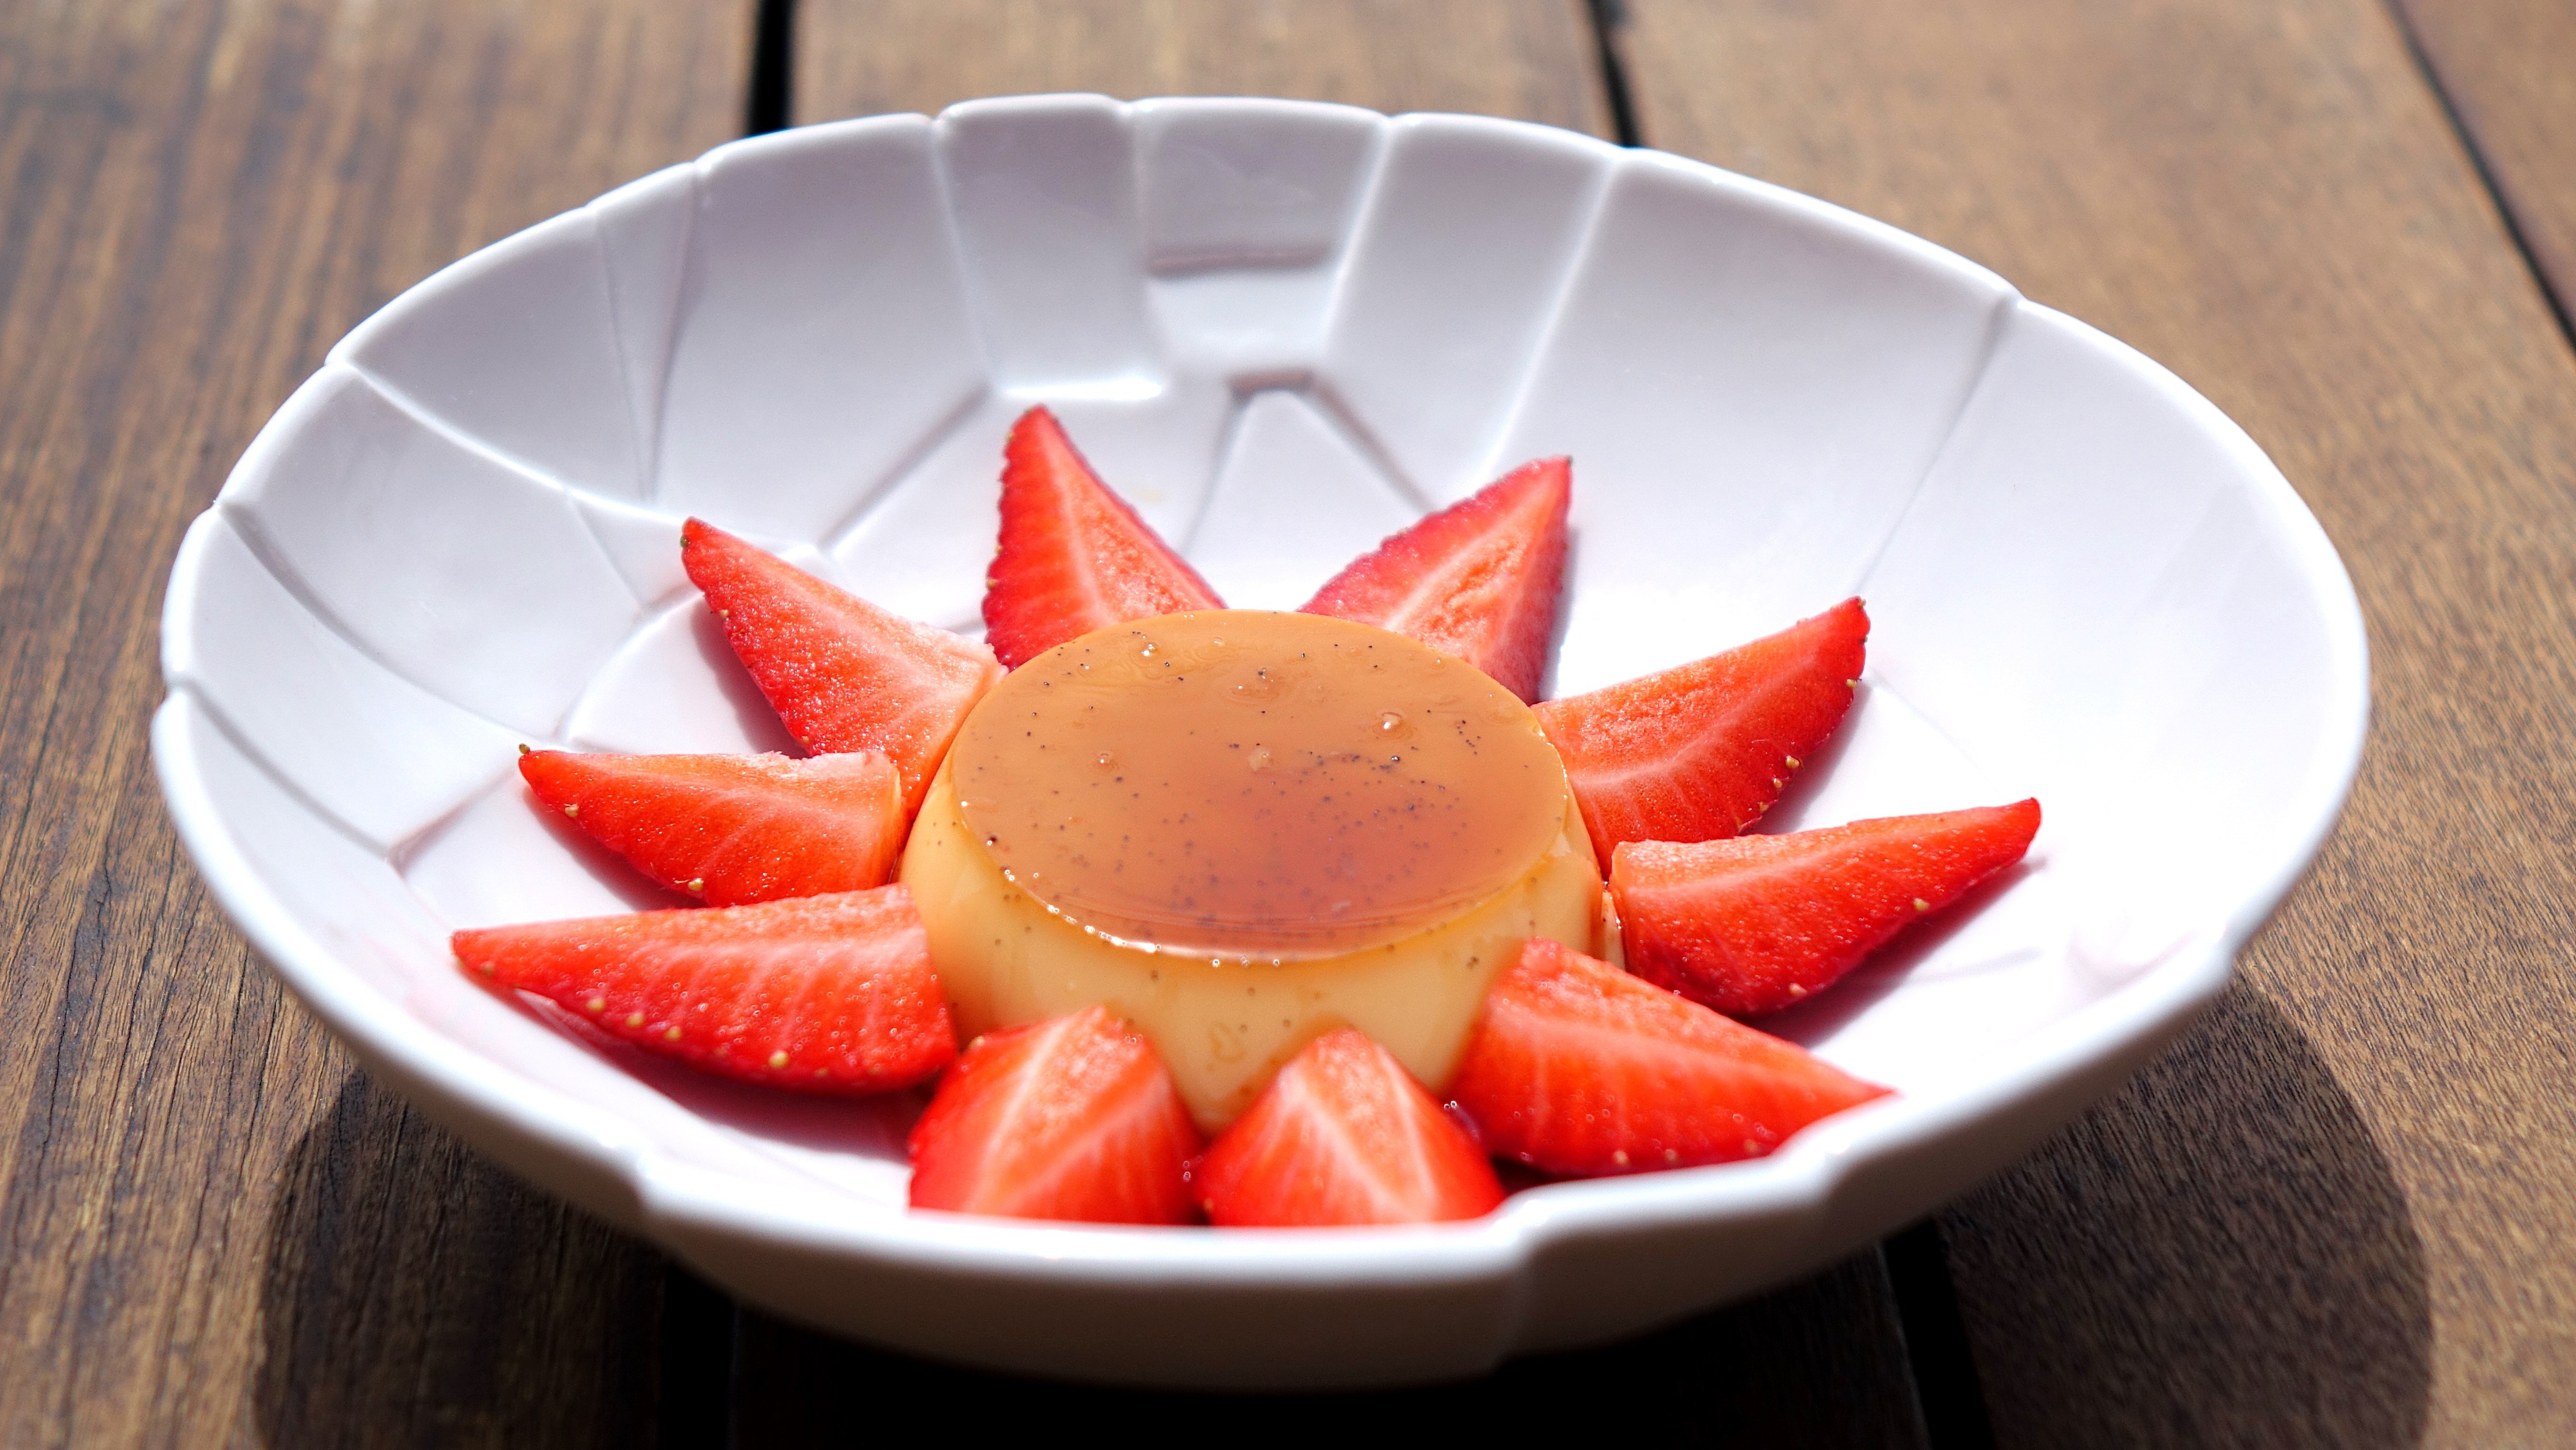 Flan (aka crème caramel), the best choice for guests